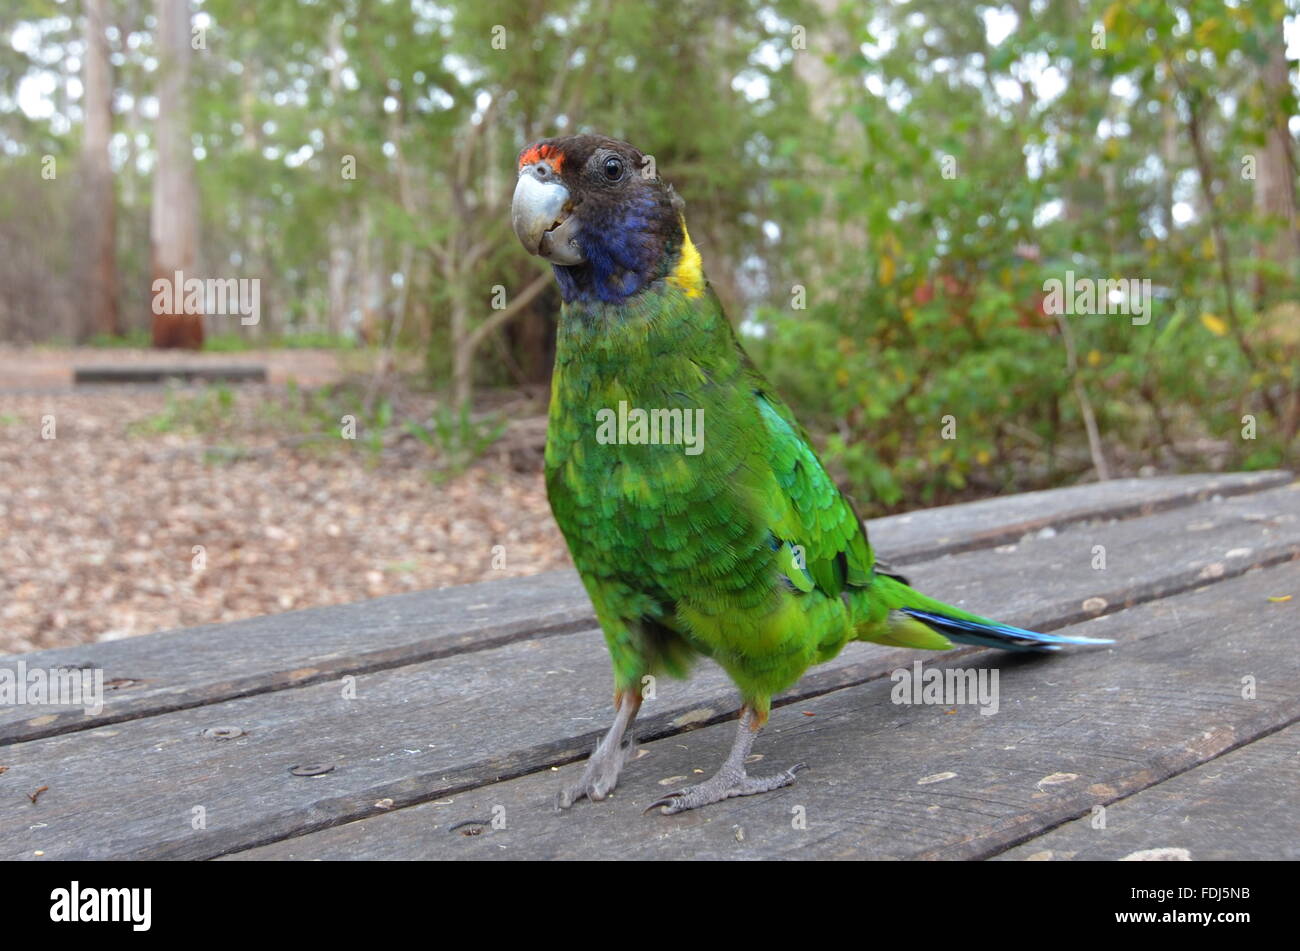 An Australian ringneck parrot on a picnic table at the Gloucester Climbing Tree in the Gloucester National Park, Australia Stock Photo